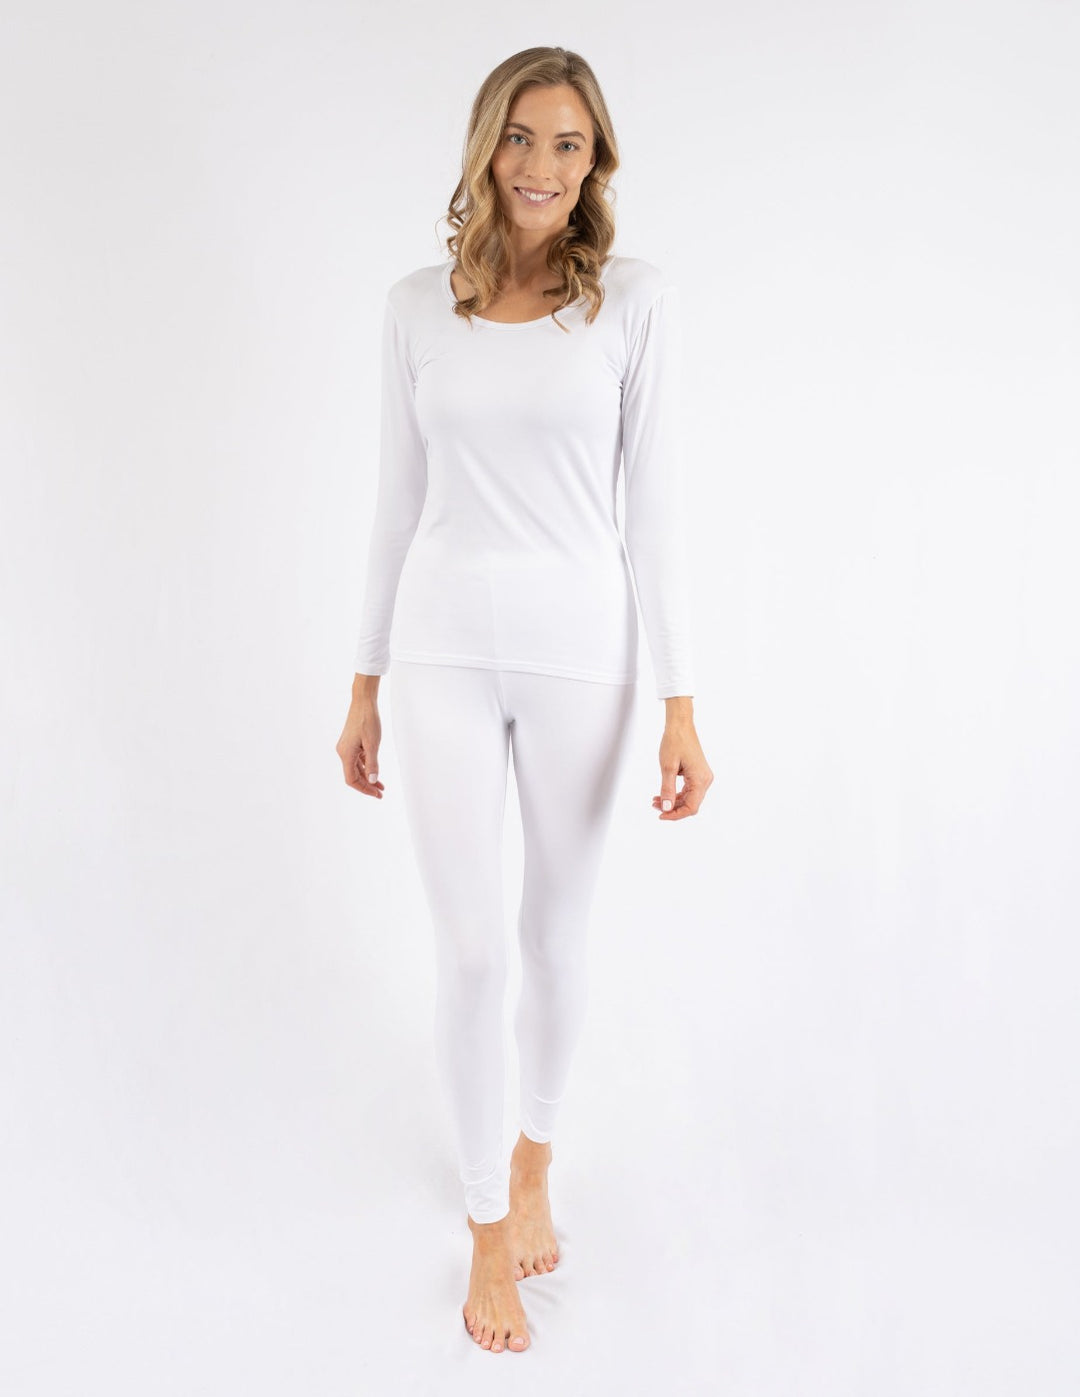 Nighttime Chill: Thermal Pajamas for a Cozy Winter Sleep– Thermajohn